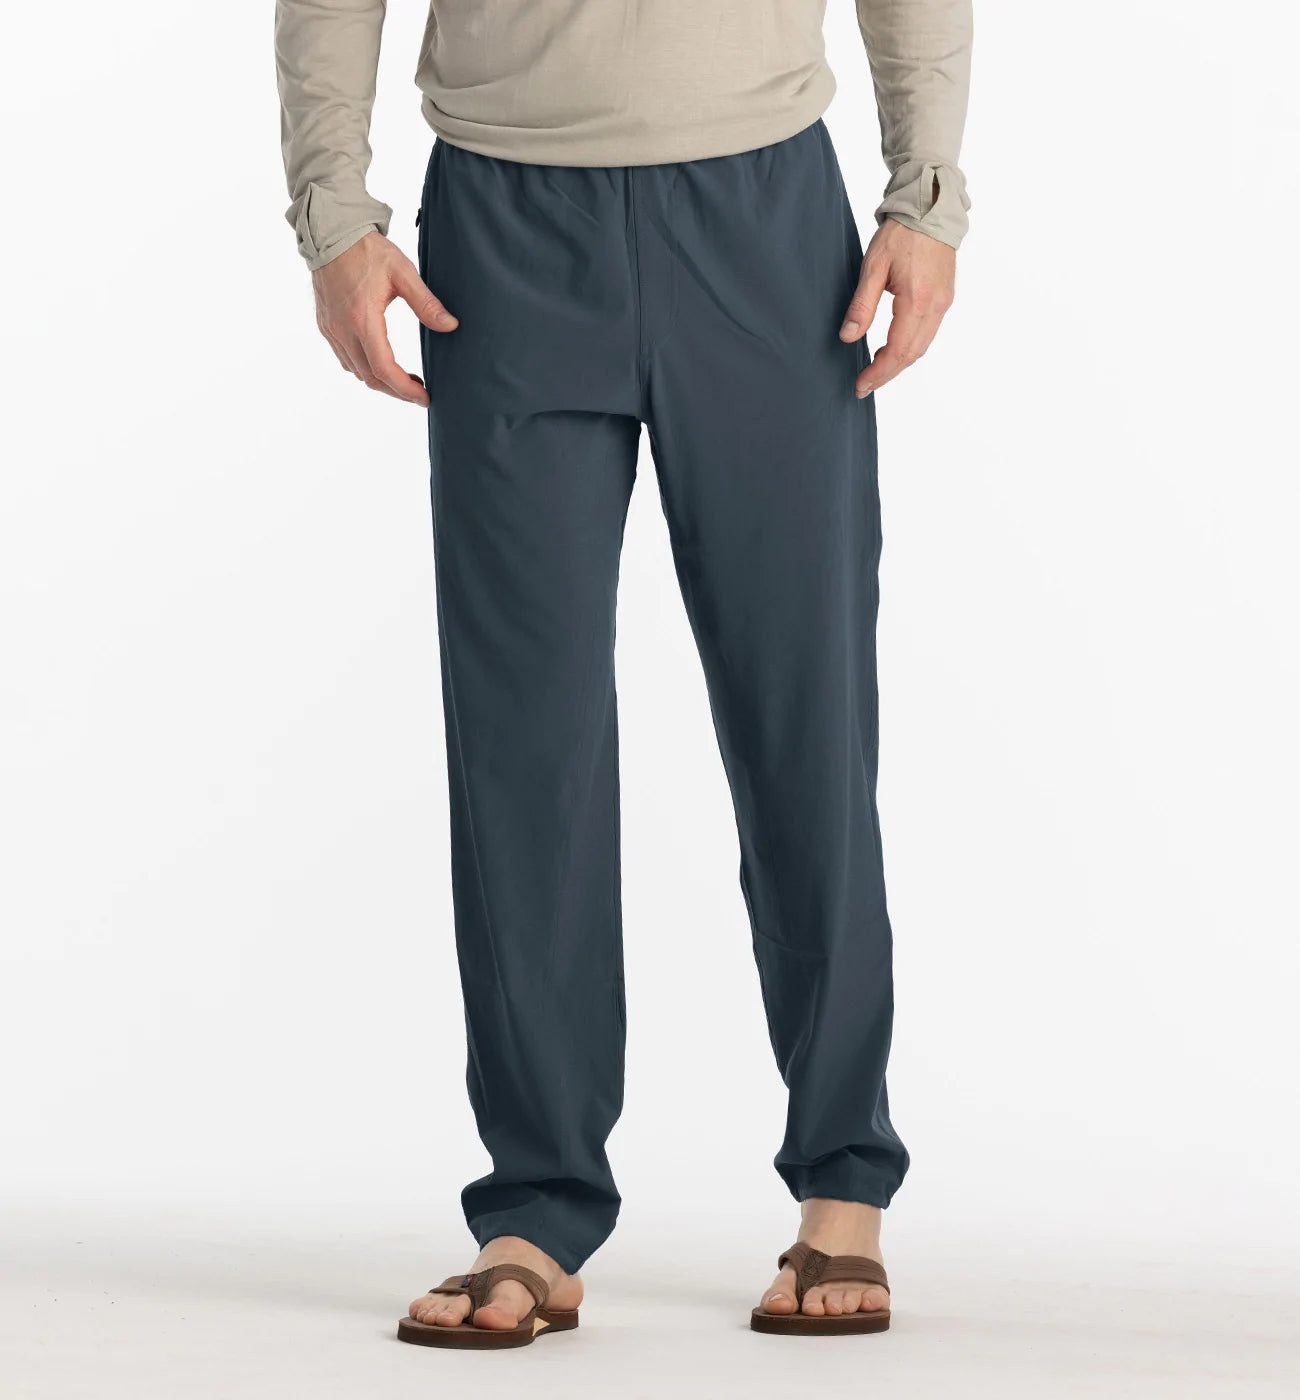 How to Create Your Custom Jogger Pant Size - Proper Cloth Help